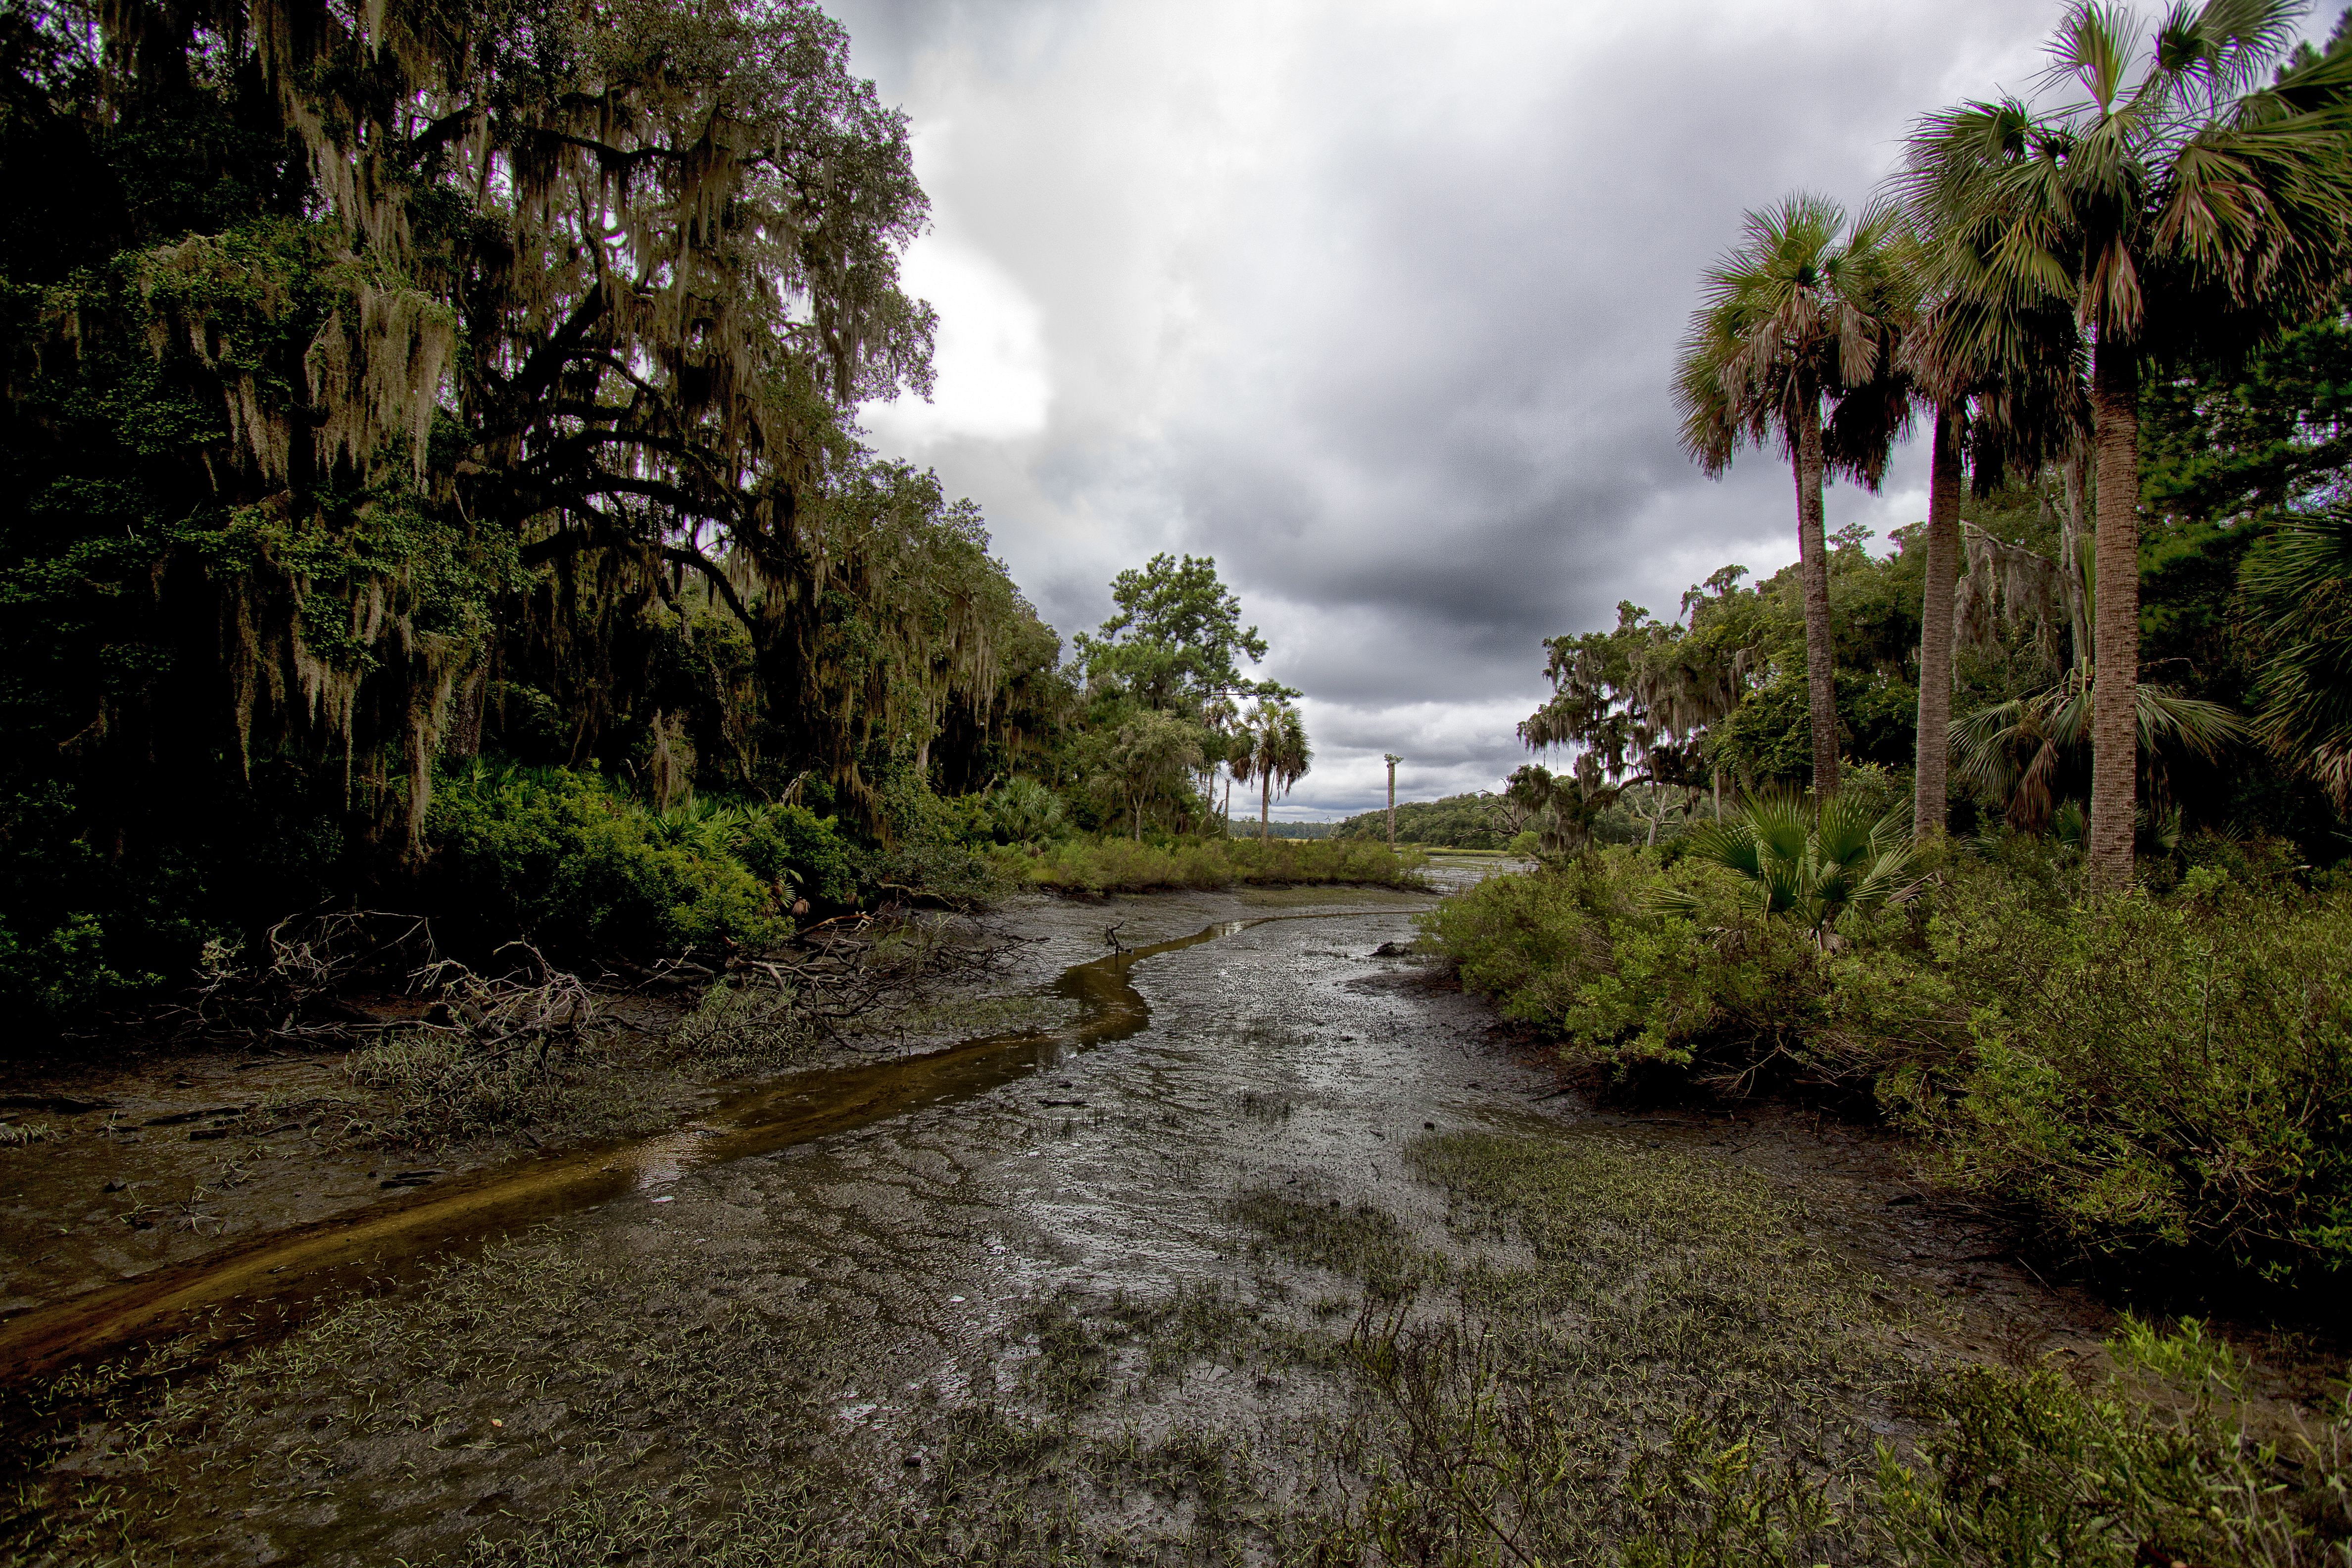 tidal creek at low tide surrounded by palm and oak trees